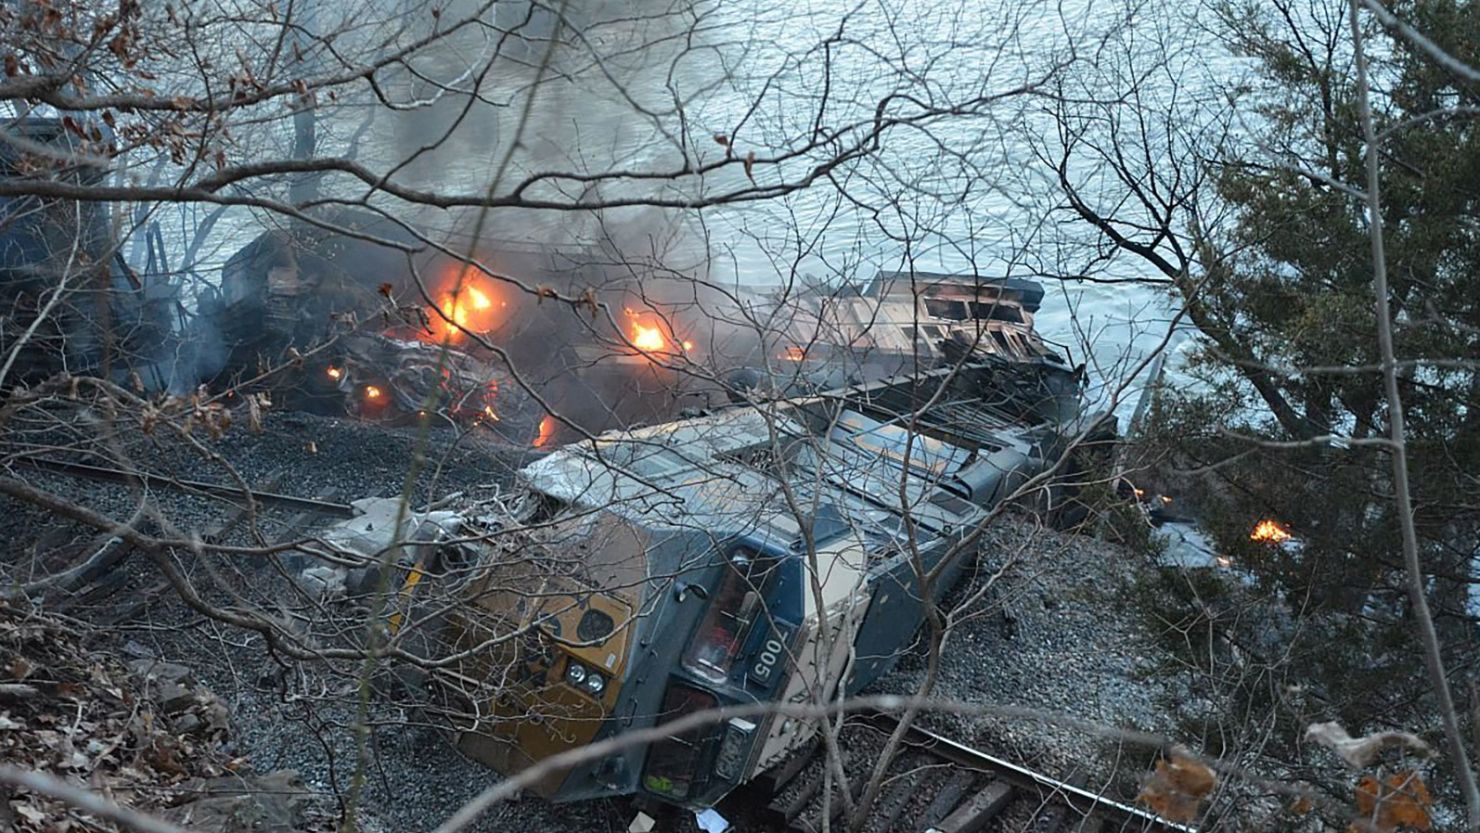 A CSX train derailed on Wednesday morning in West Virginia after striking a rockslide.